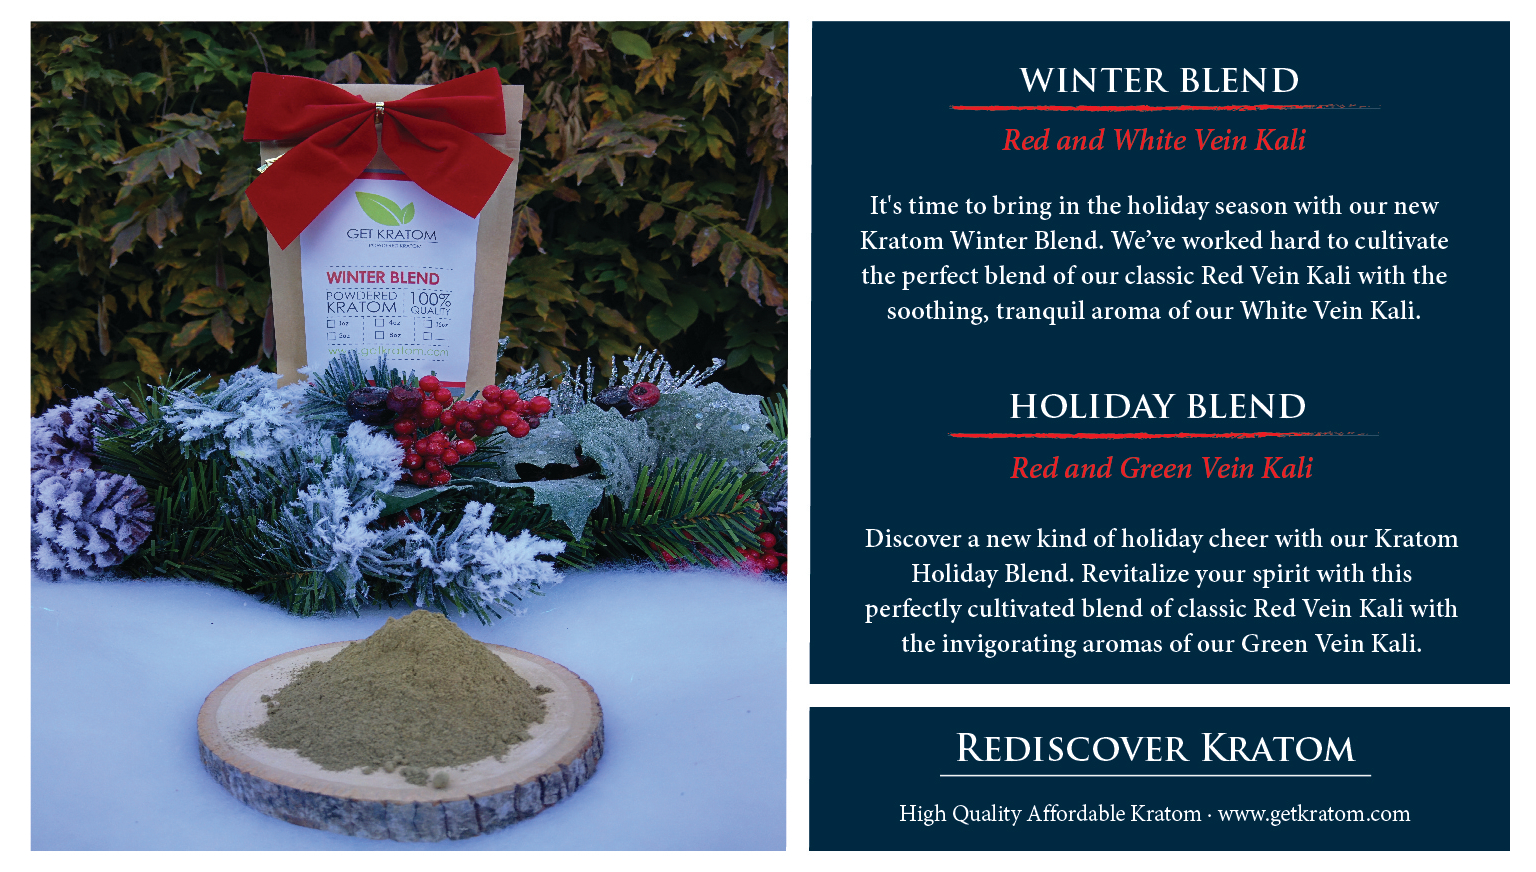 Discover a new kind of holiday cheer with our Kratom Holiday Blend. Revitalize your spirit with this perfectly cultivated blend of classic Red Vein Kali with the invigorating aromas of our Green Vein Kali. It's time to bring in the holiday season with our new Kratom Winter Blend. We've worked hard to cultivate the perfect blend of our classic Red Vein Kali with the soothing, tranquil aroma of our White Vein Kali. Take a break from the cold and warm up to this festive pairing, available for a limited time exclusively at Get Kratom.